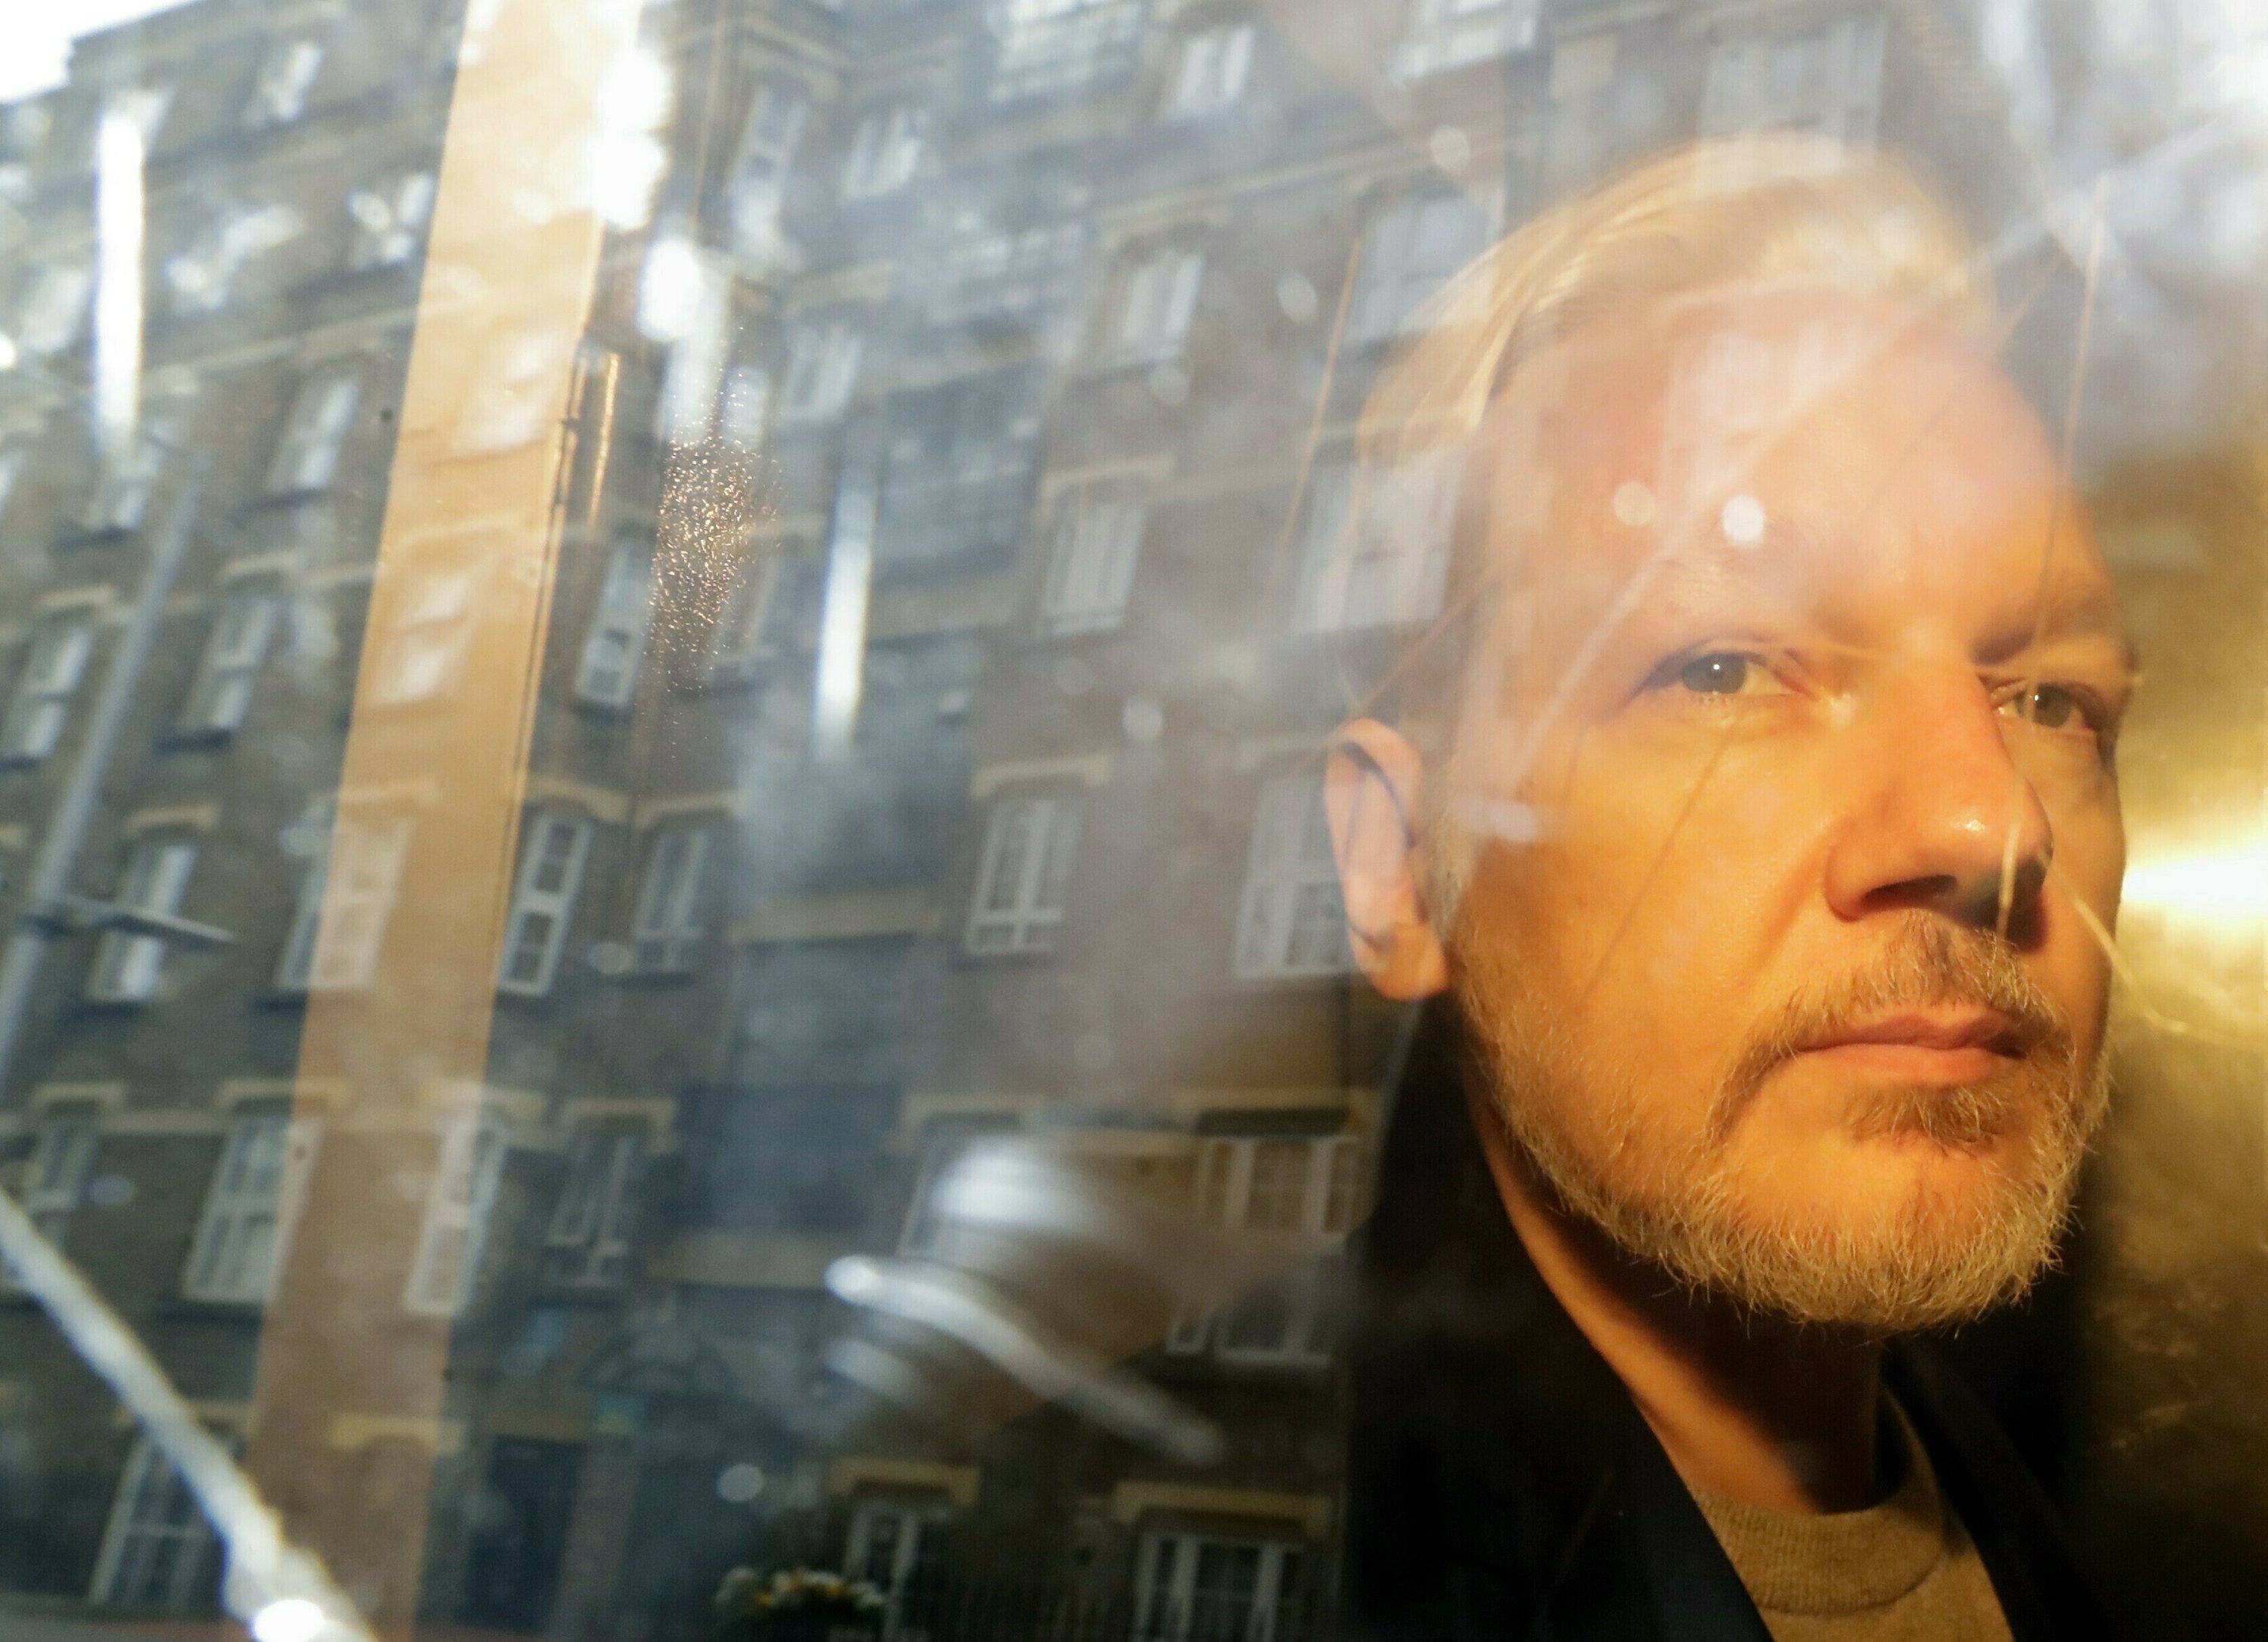 The British judge will rule on the US extradition of Assange from WikiLeaks